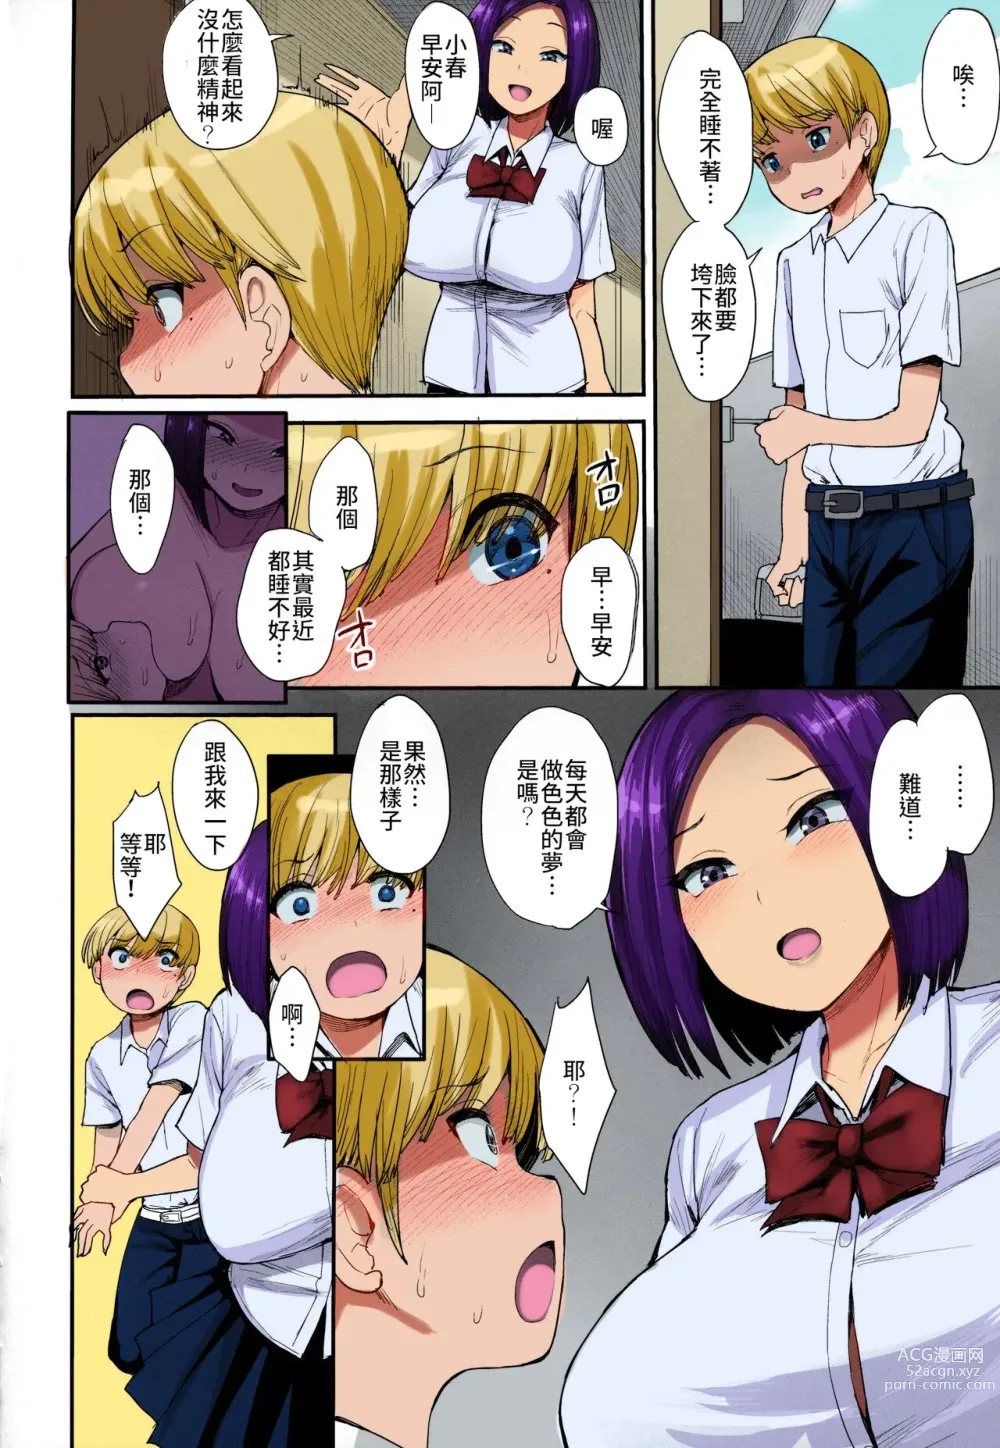 Page 7 of doujinshi 魅魔鄰居 (decensored)